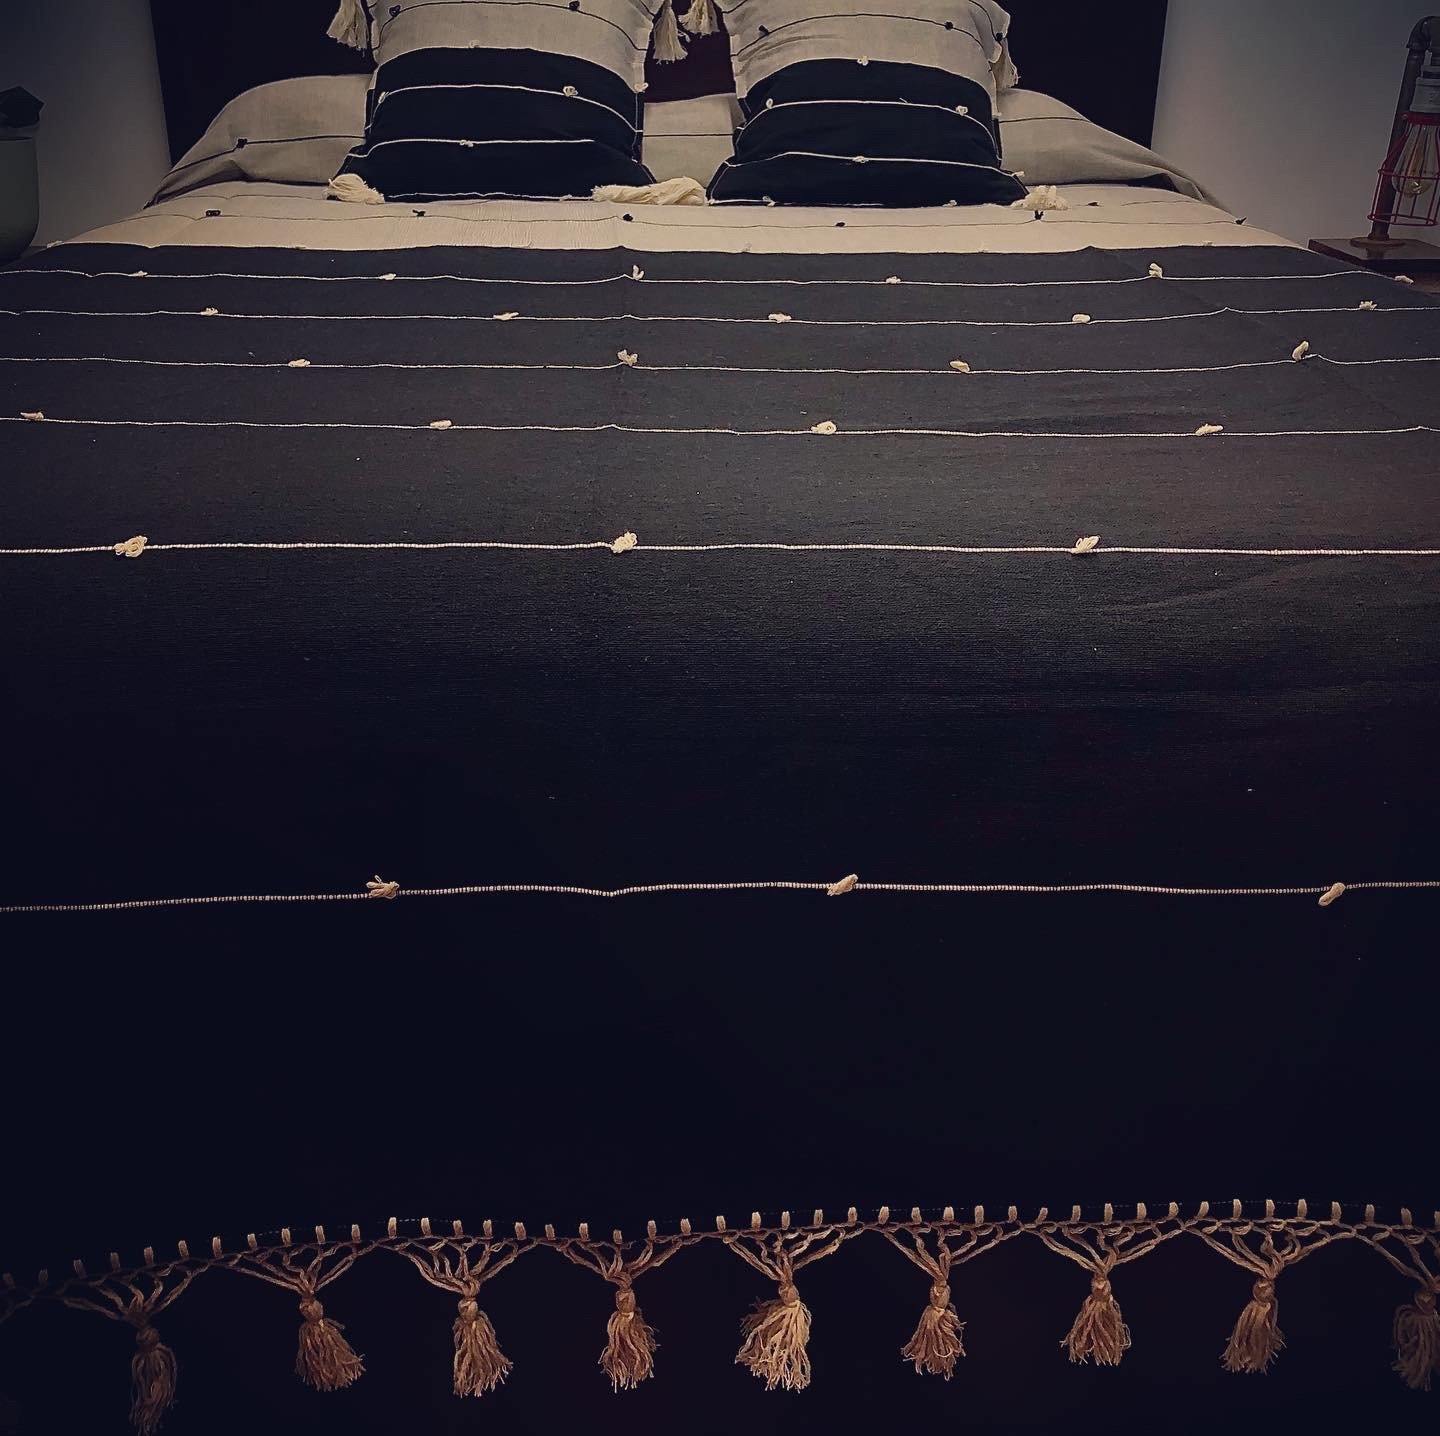 Handmade, Pedal Loomed Bedspread (Full Size) with Matching Decorative Pillow Cases - HomageMade 